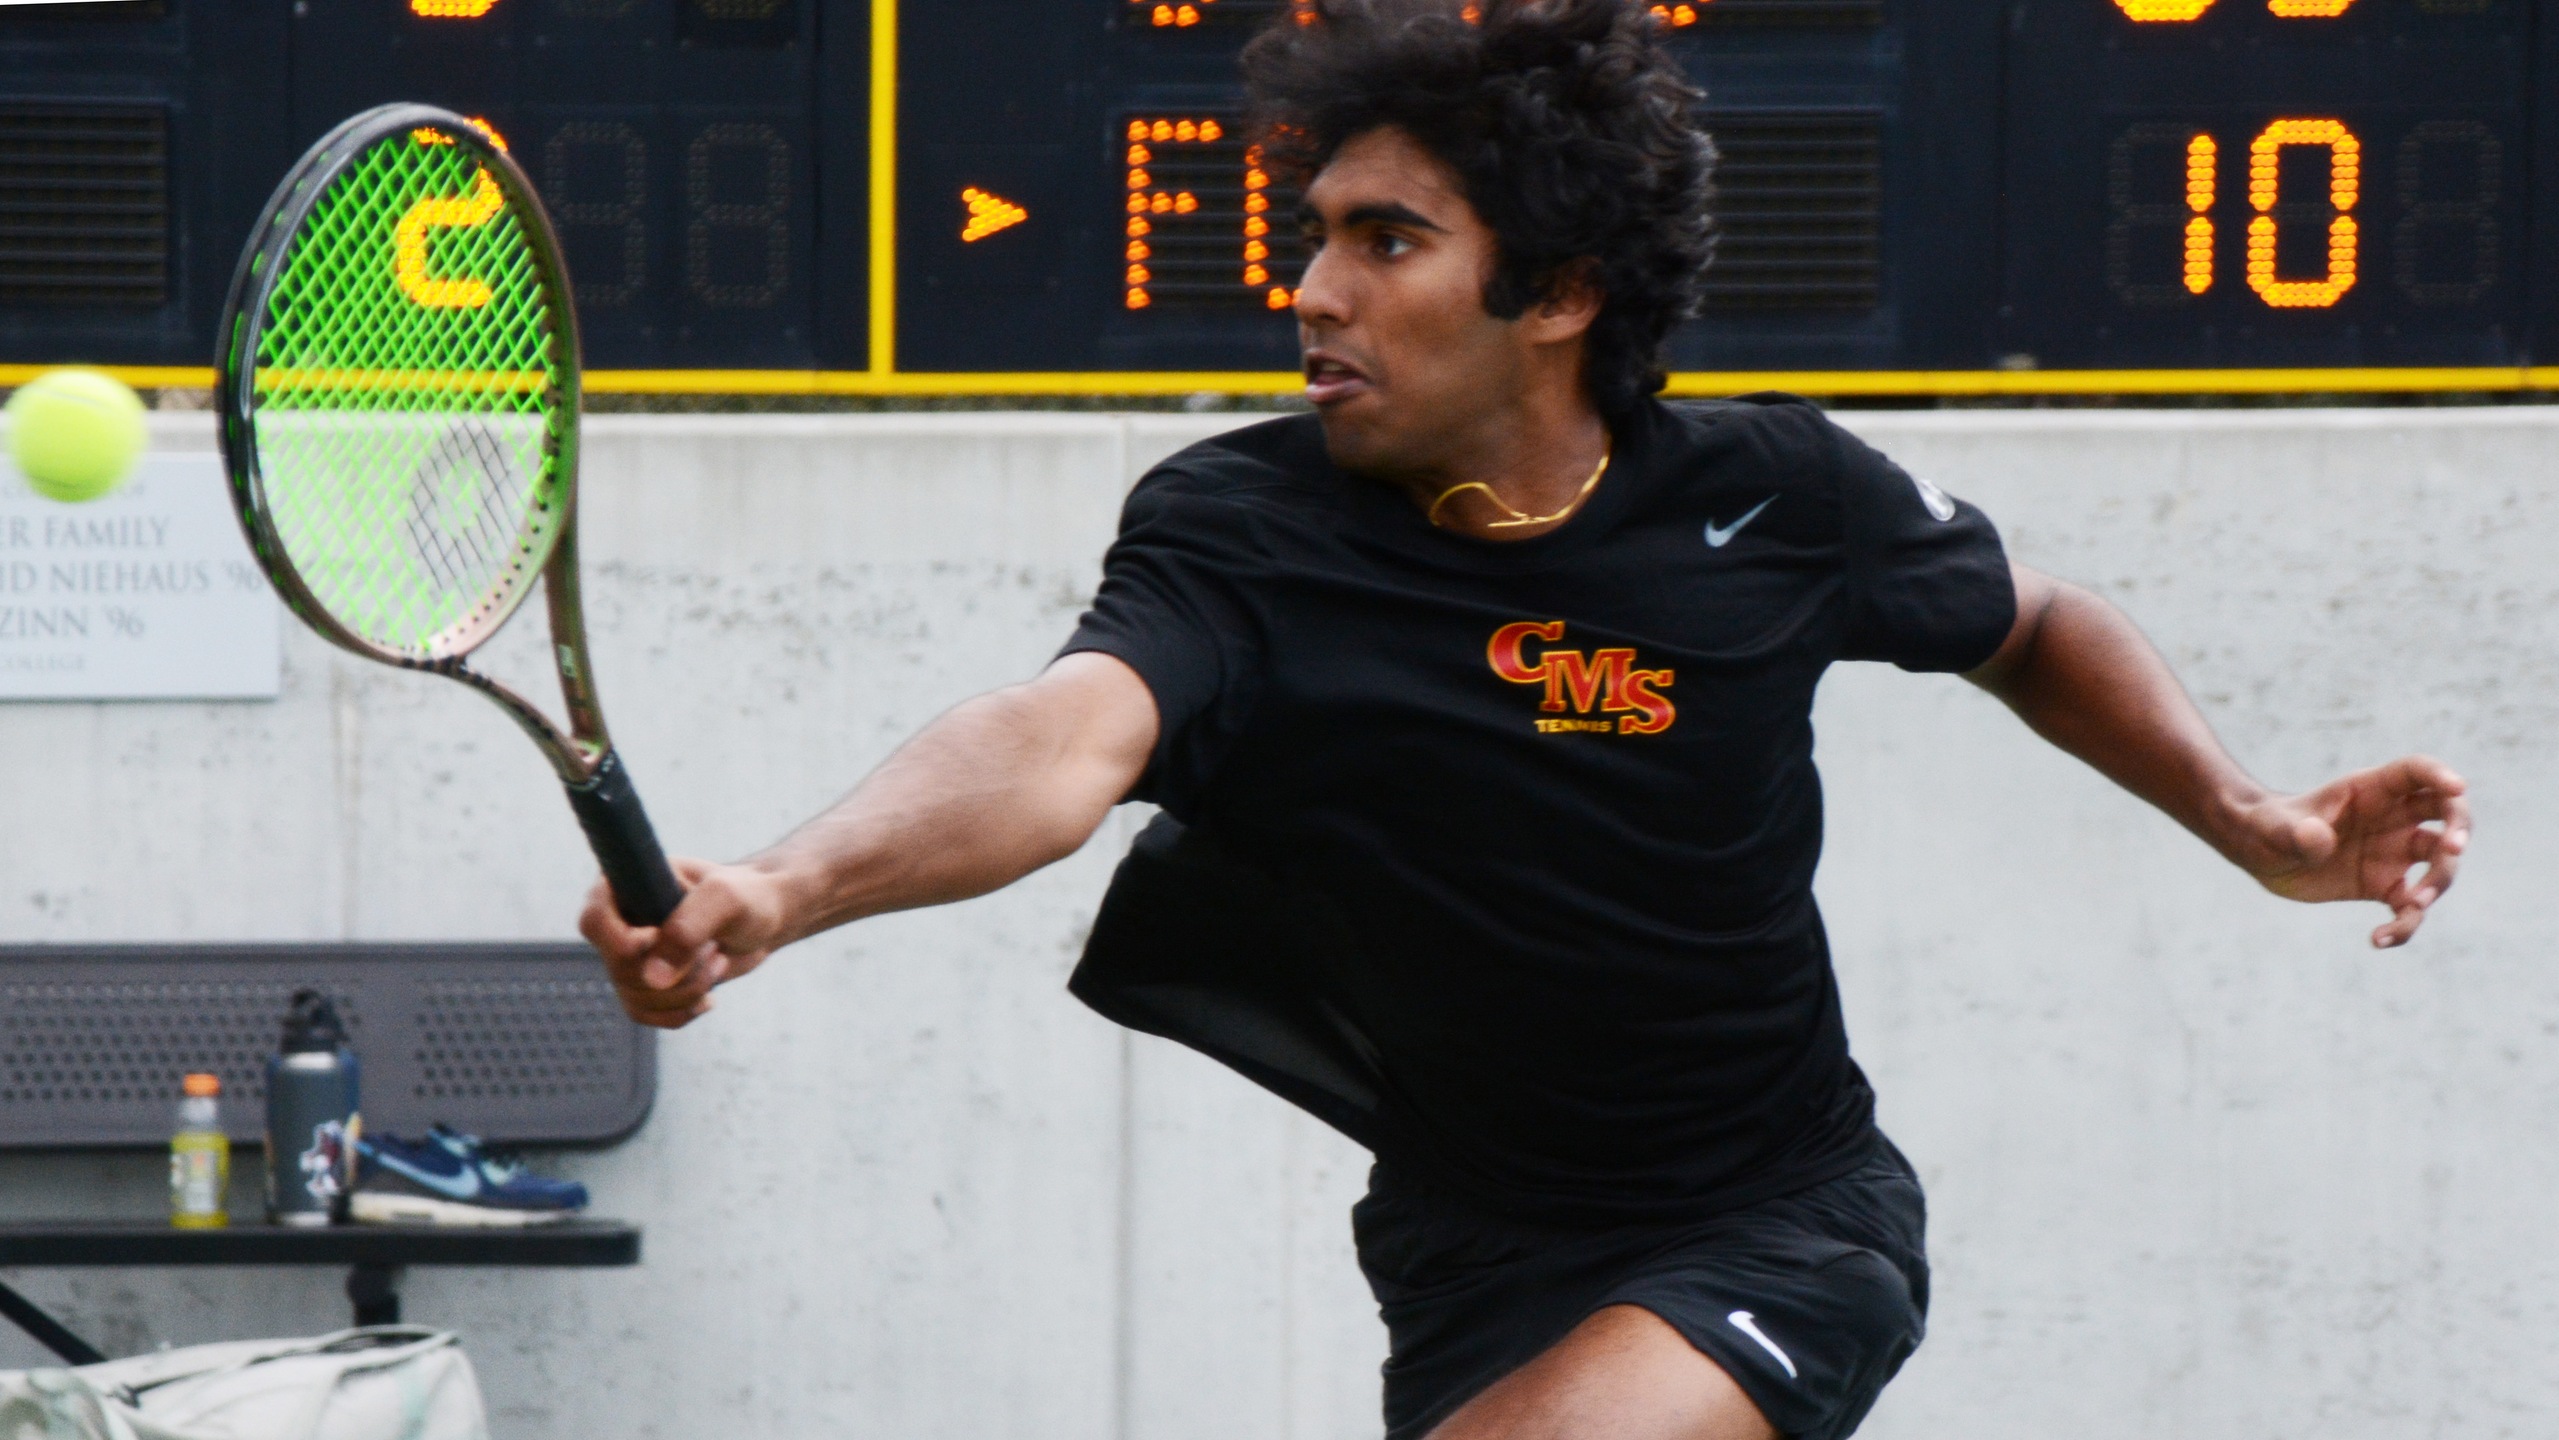 Anirudh Reddy capped a 4-0 day with a 3-setter vs. Babson